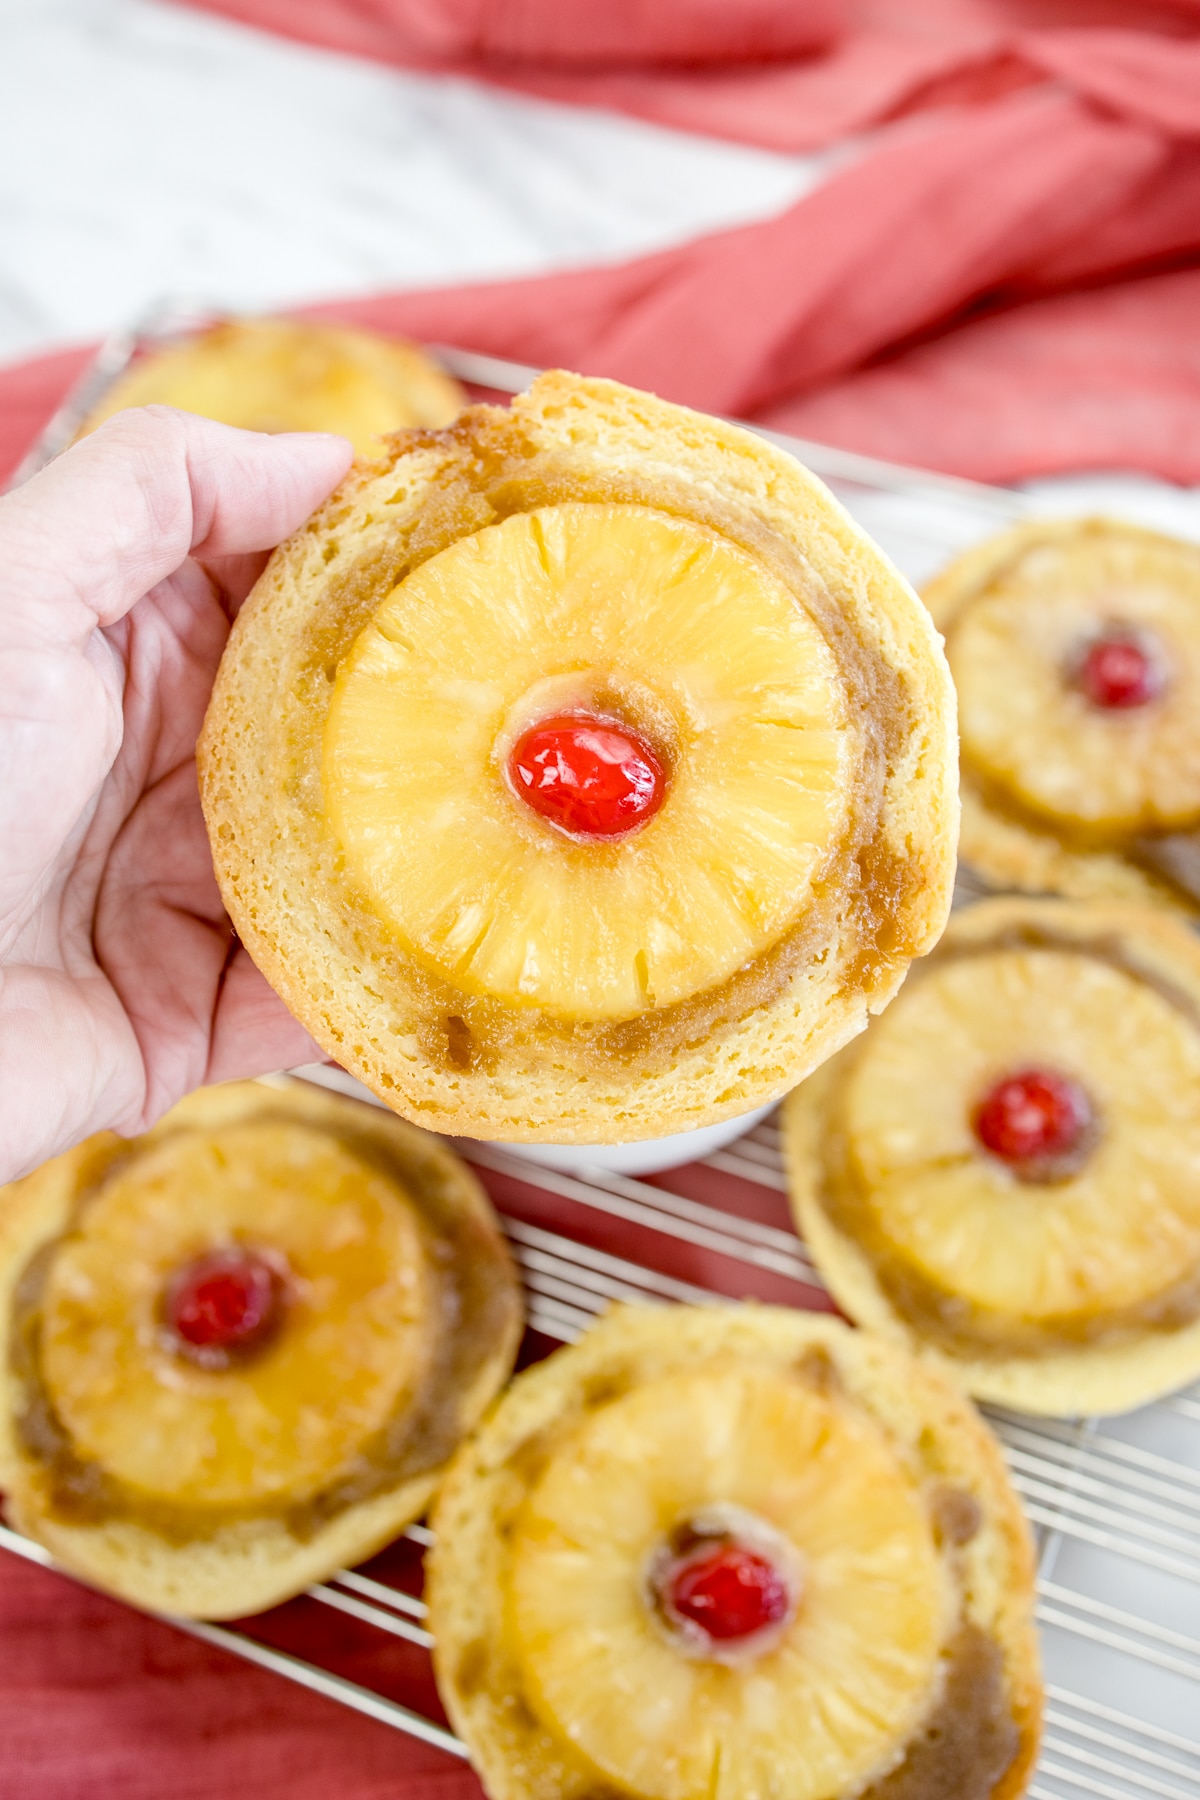 Pineapple Upside Down Cookies with a maraschino cherry in the middle on a wire rack, with one cookie being held in mid-air by a hand.